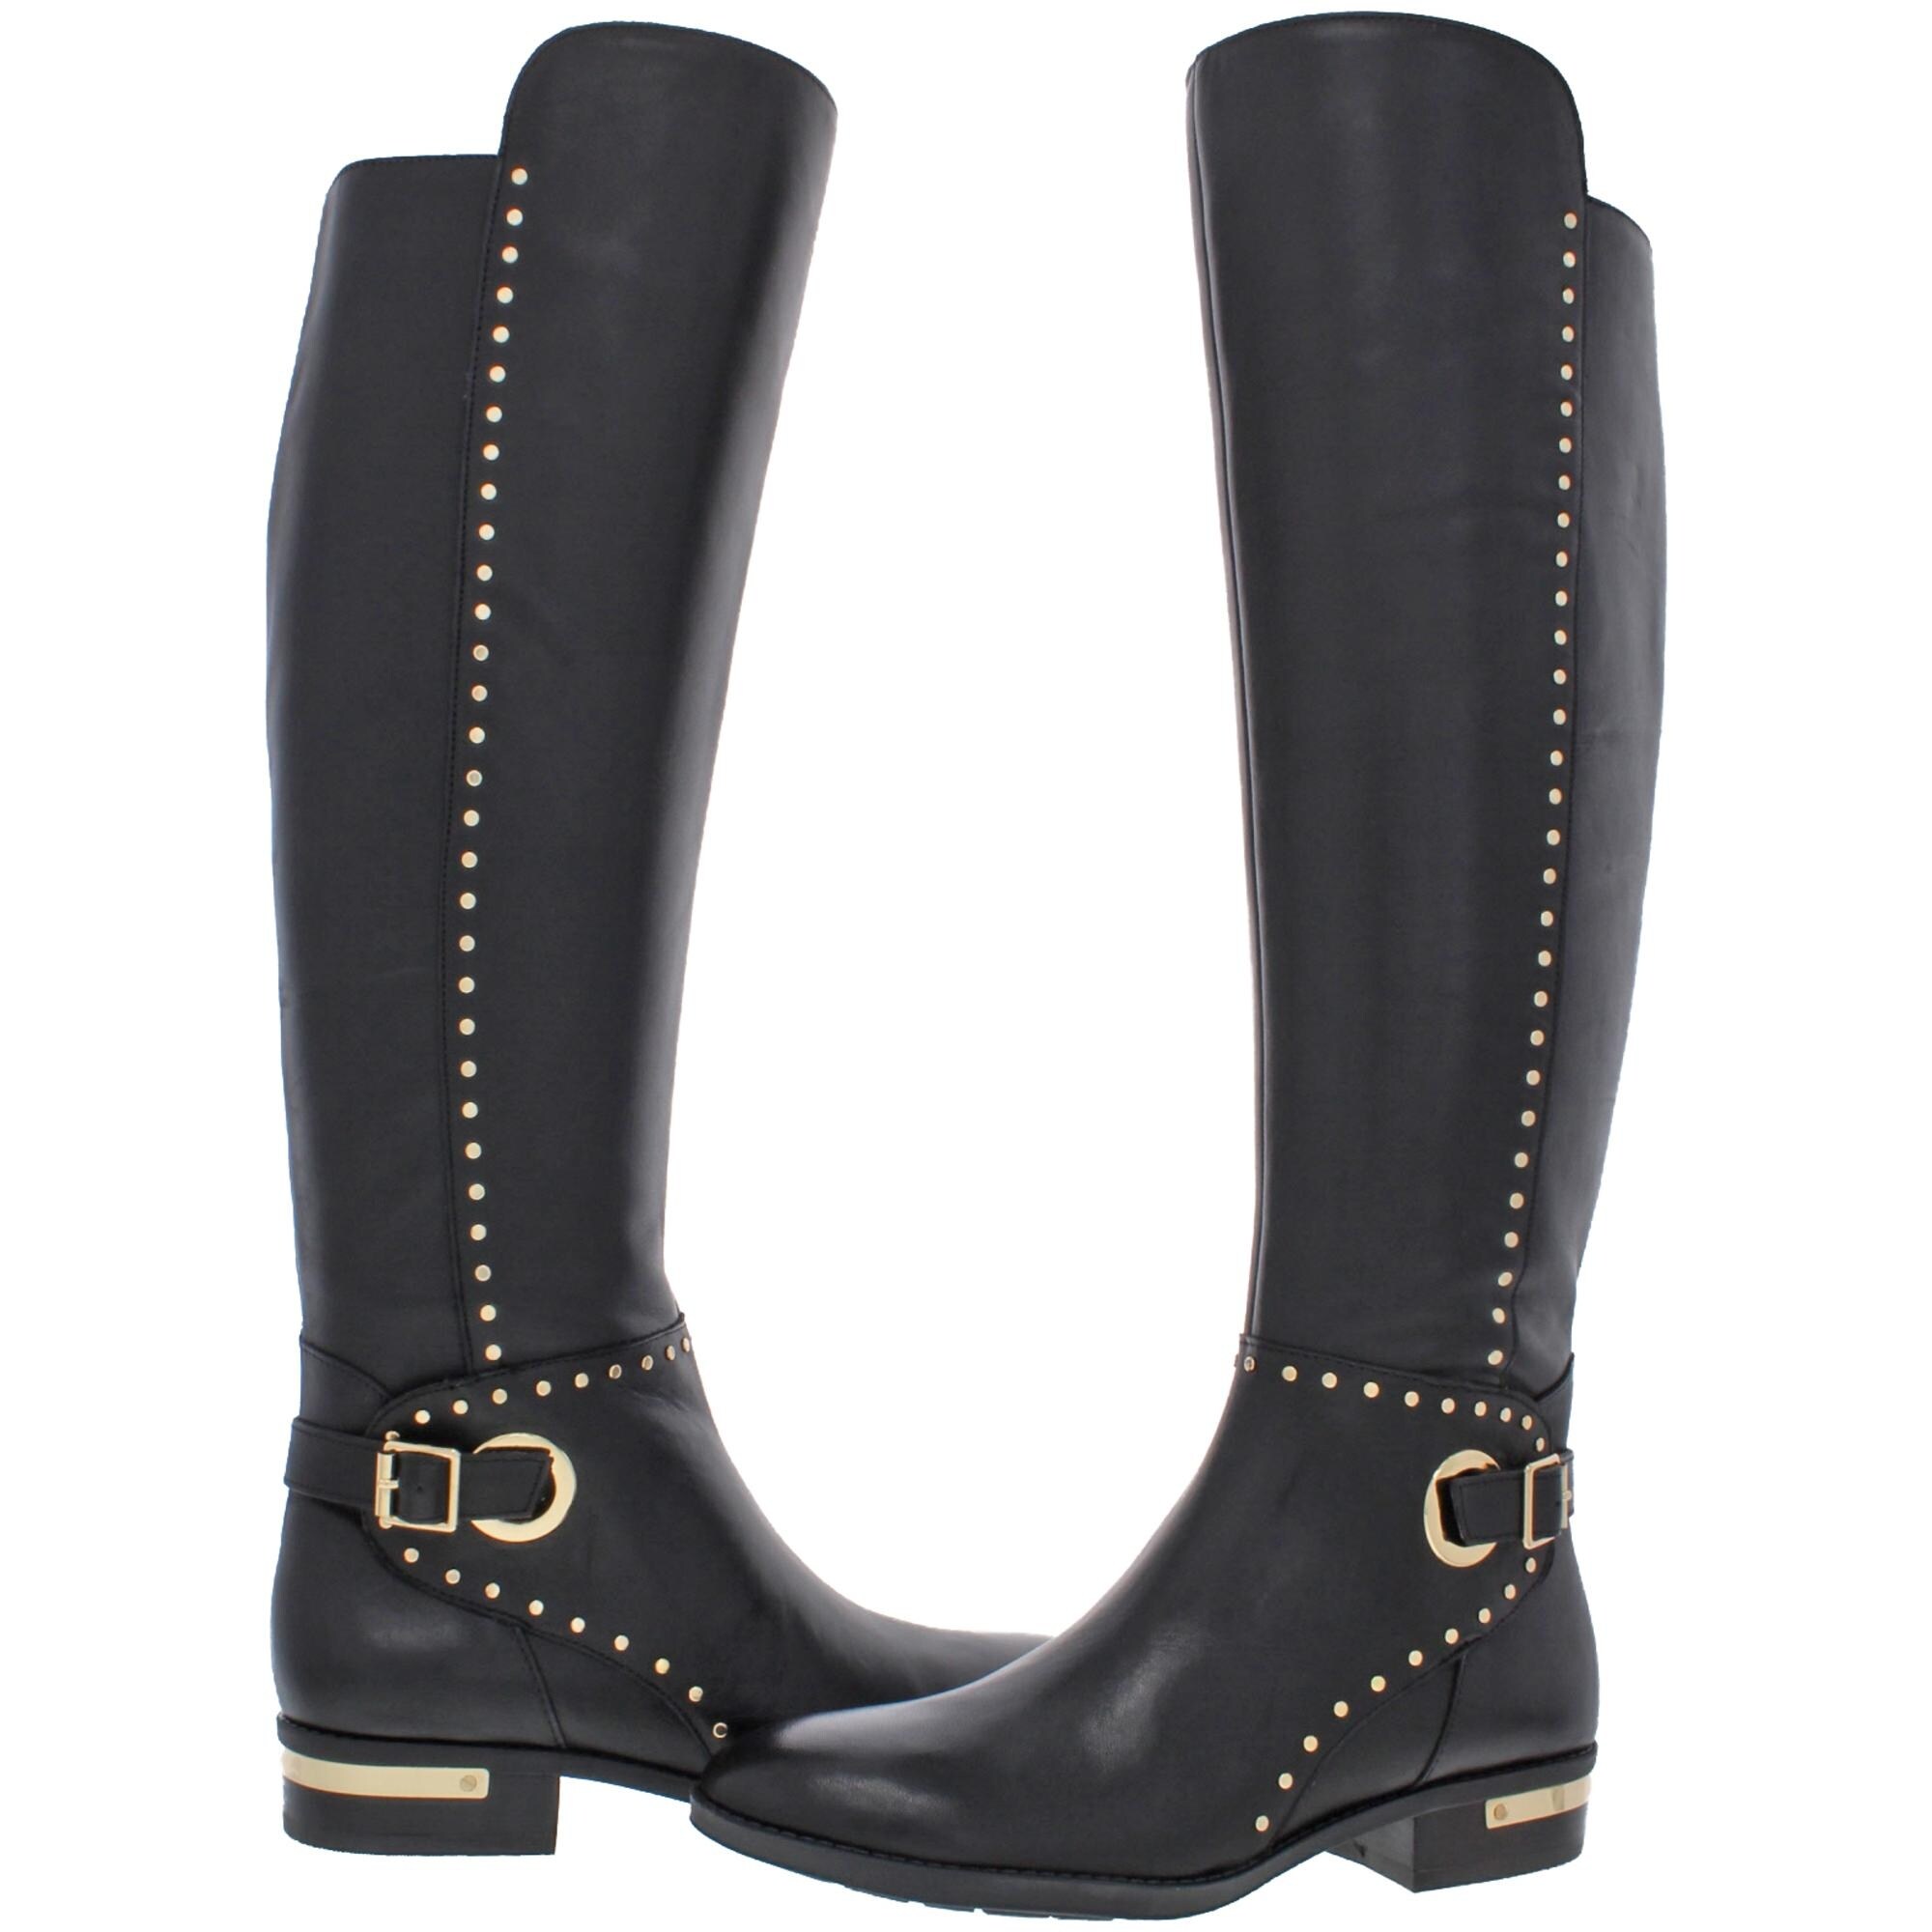 vince camuto women's boots